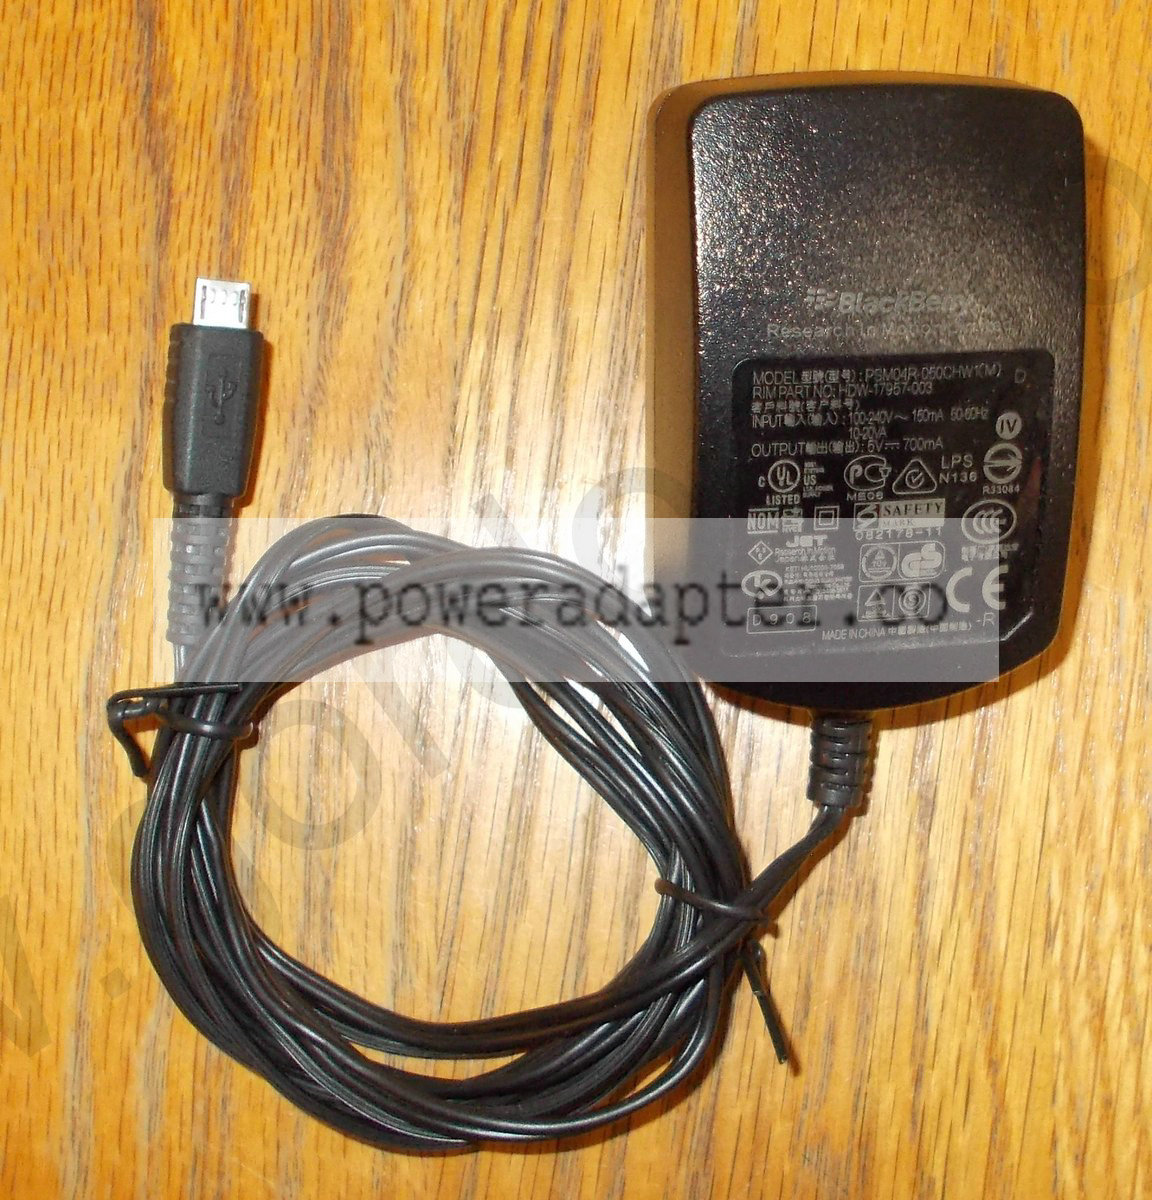 Blackberry PSM04R-050CHW1 AC Adapter Charger [PSM04R-050CH] Blackberry Model PSM04R-050CHW1 RIM Research In Motion Par - Click Image to Close